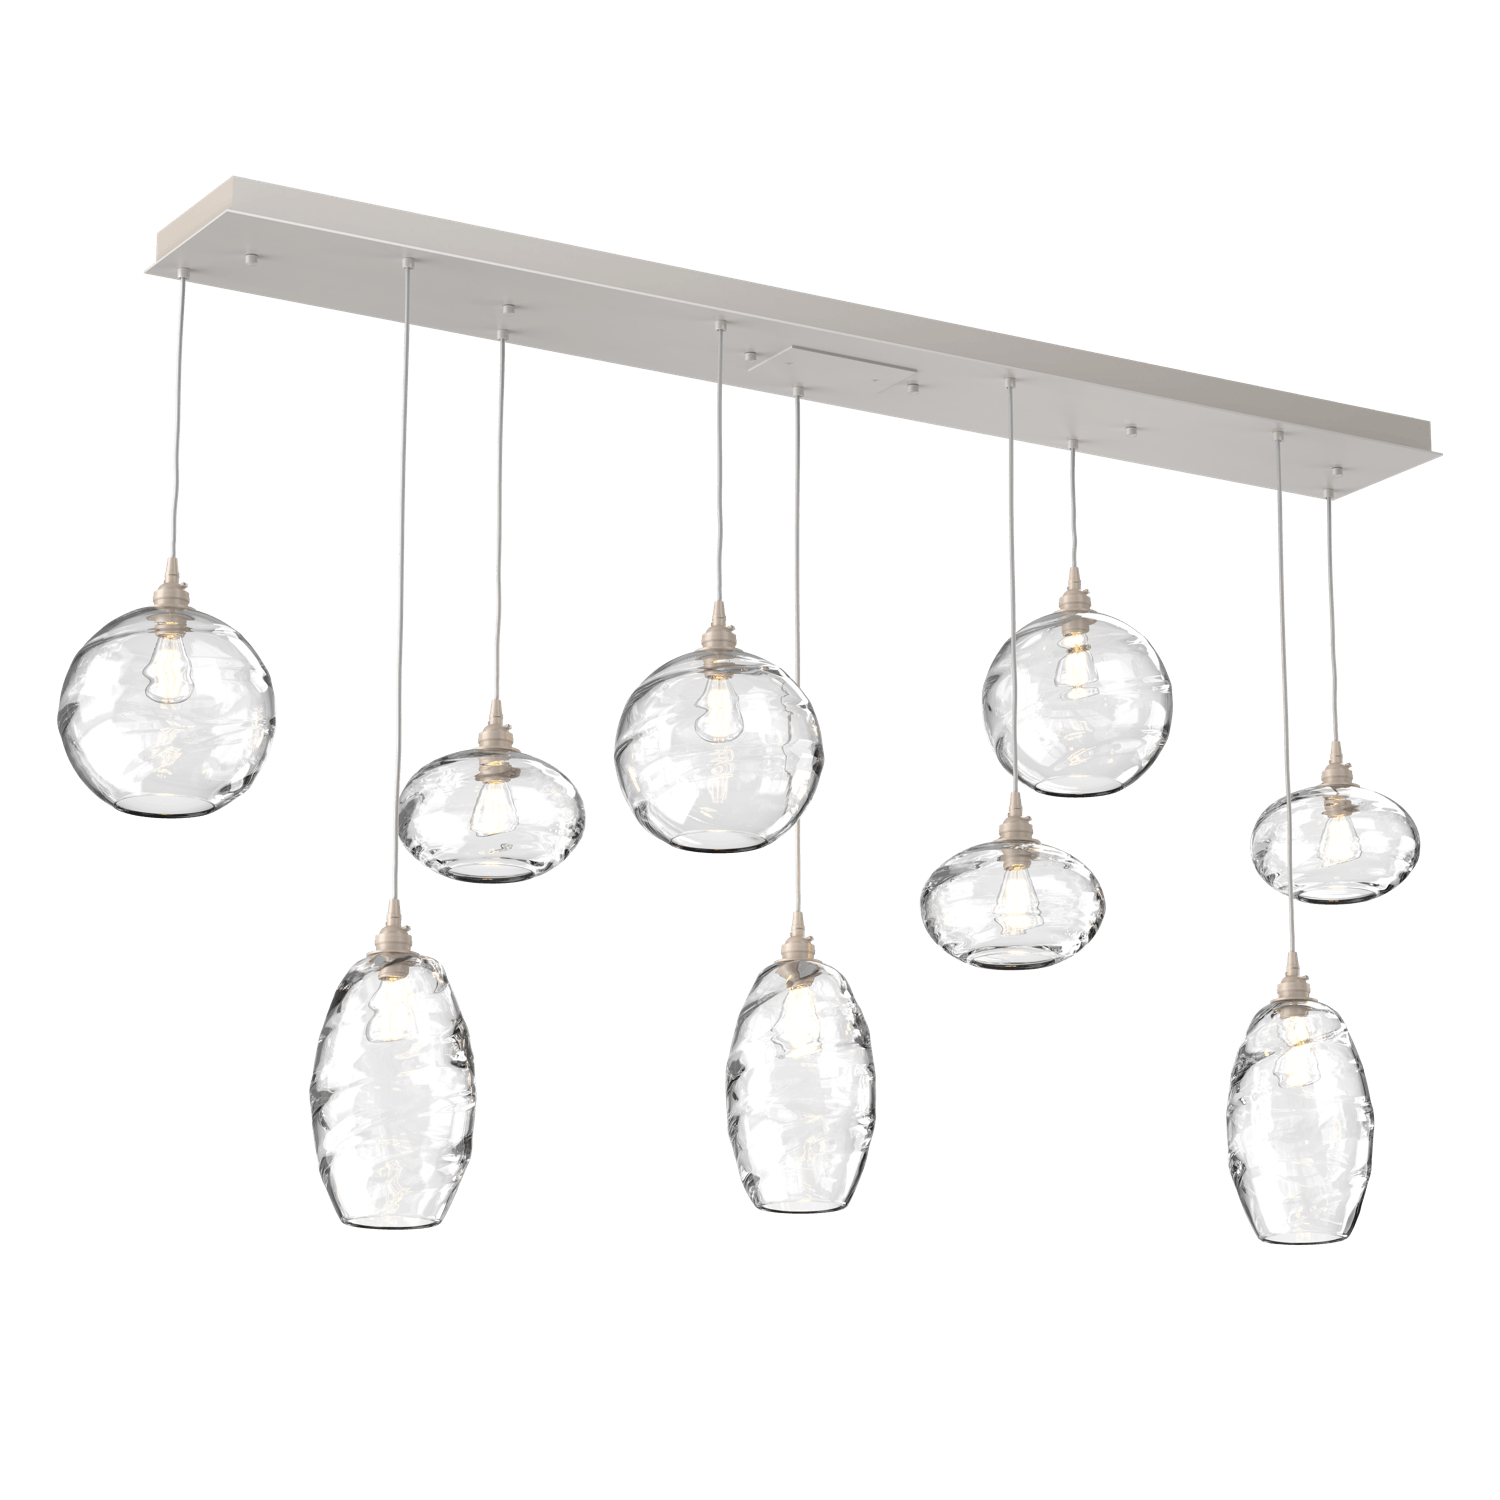 PLB0048-09-BS-OC-Hammerton-Studio-Optic-Blown-Glass-Misto-9-light-linear-pendant-chandelier-with-metallic-beige-silver-finish-and-optic-clear-blown-glass-shades-and-incandescent-lamping